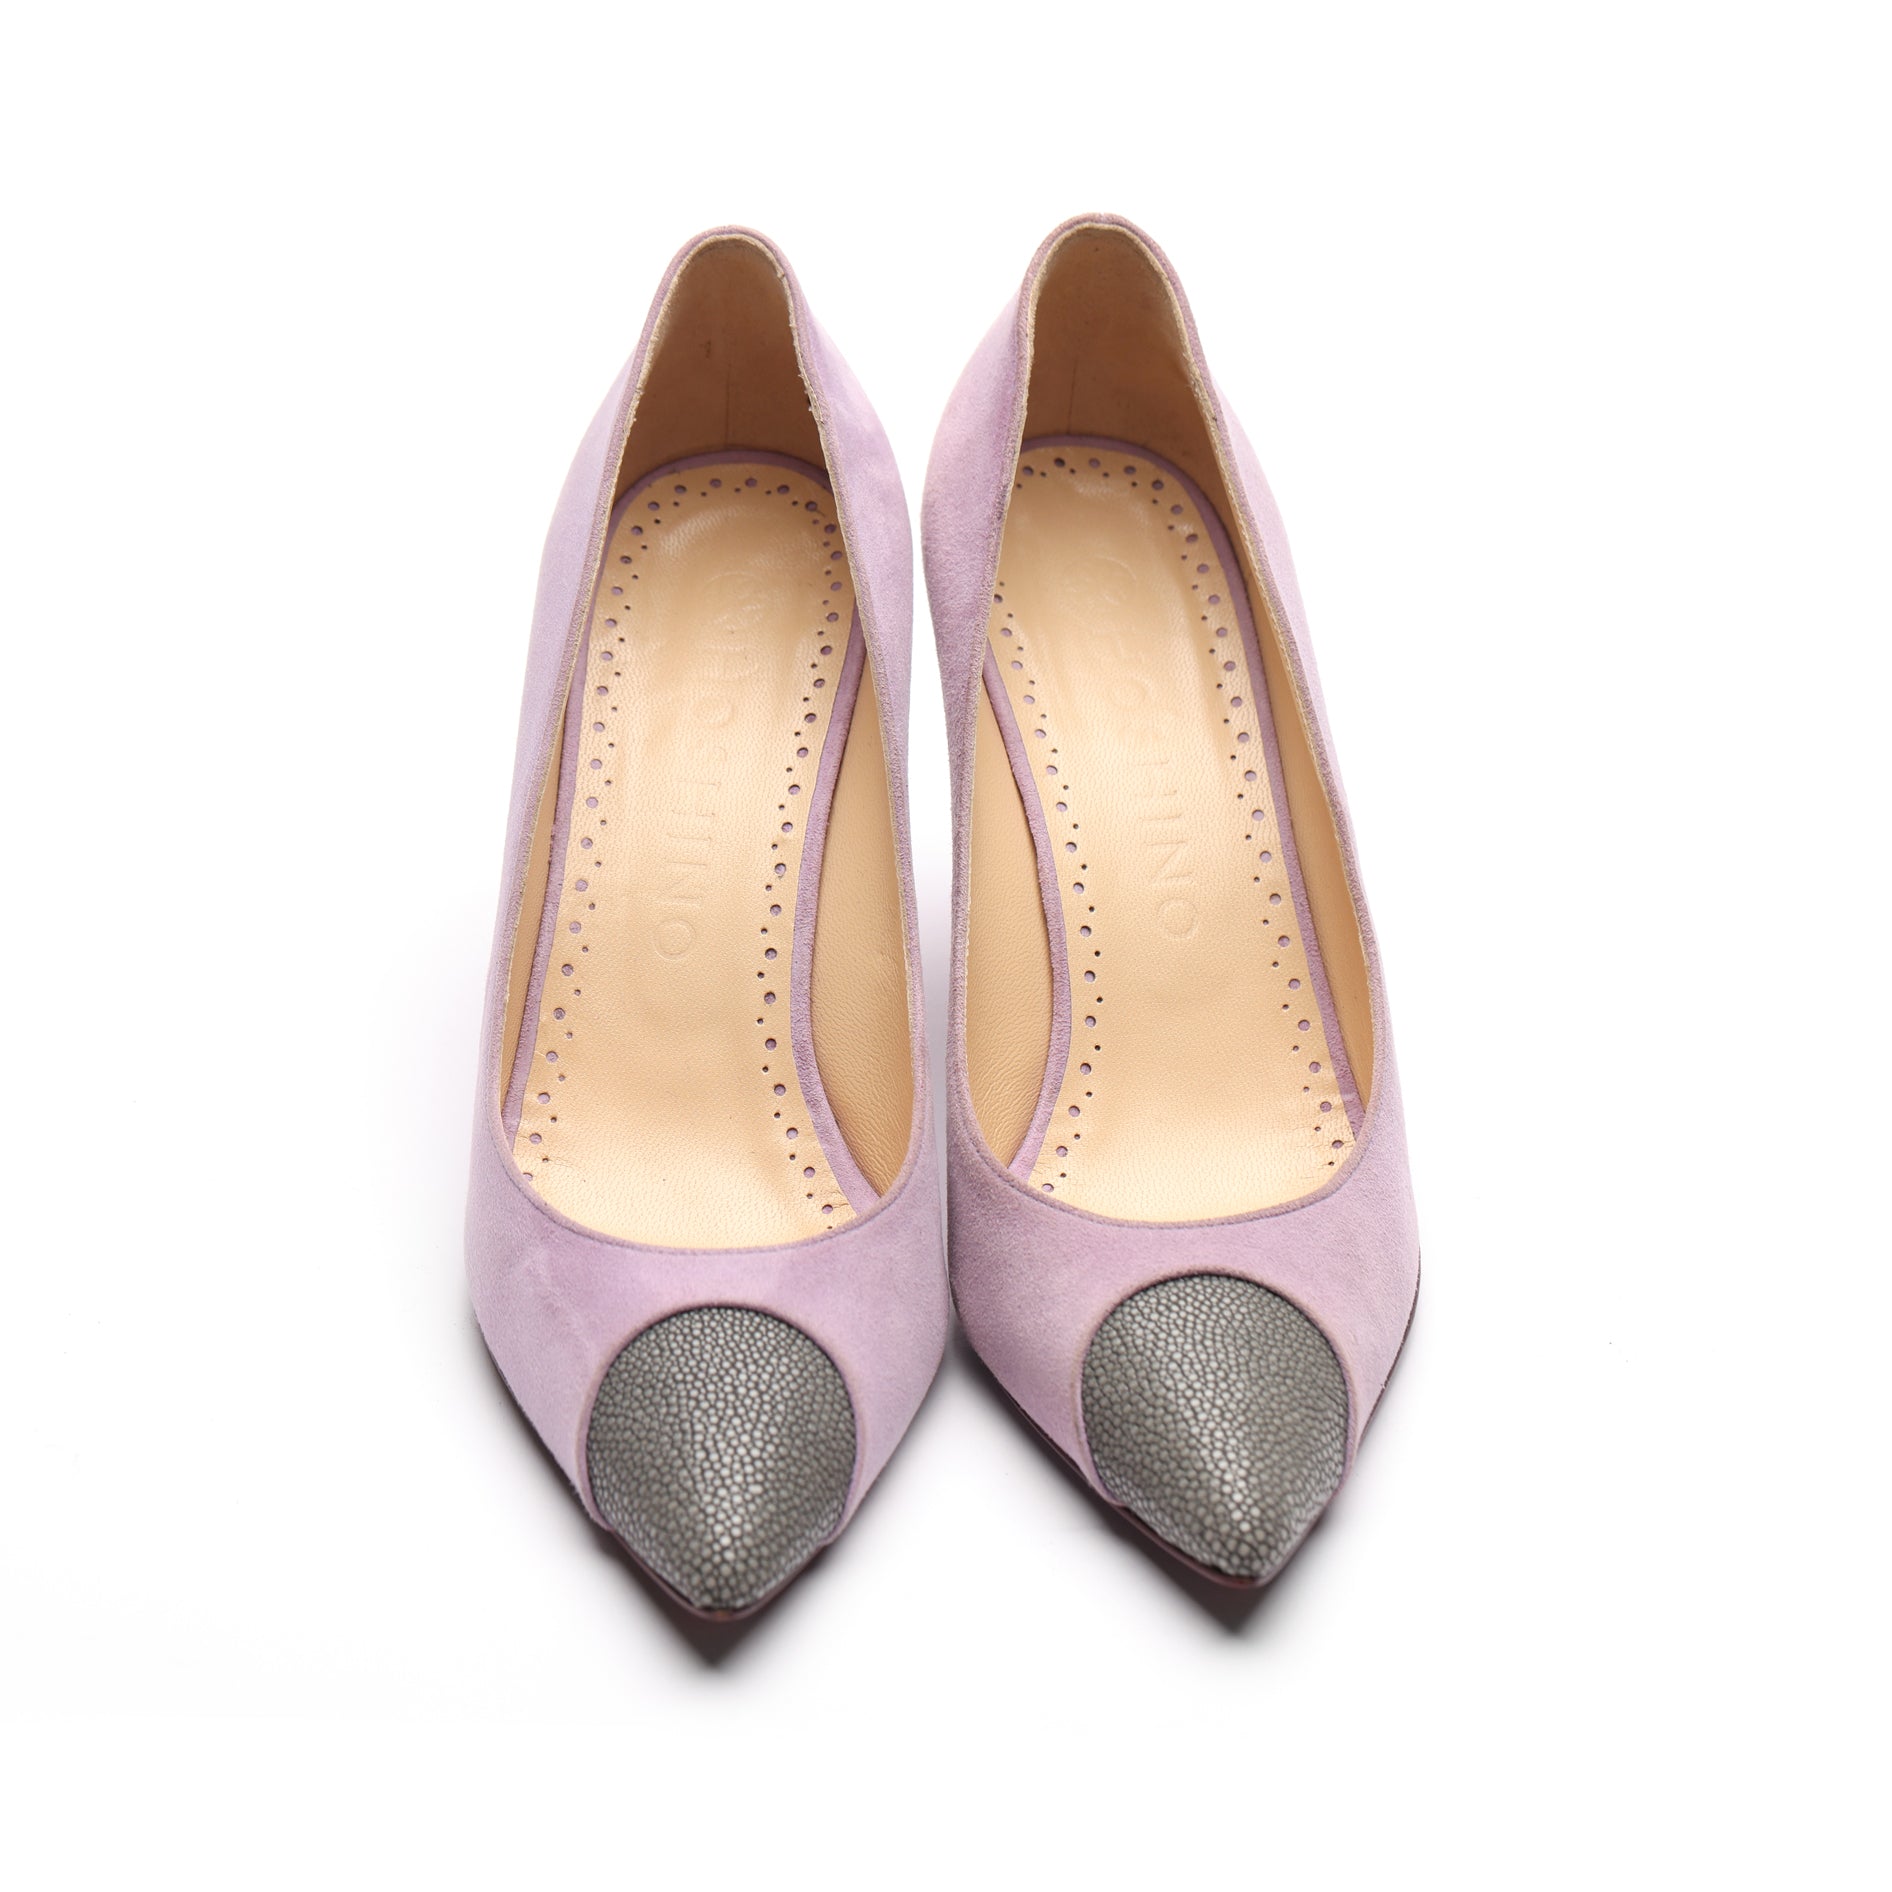 [women's] From Iris - Arc - combination pumps - lavender suede x gray stingray